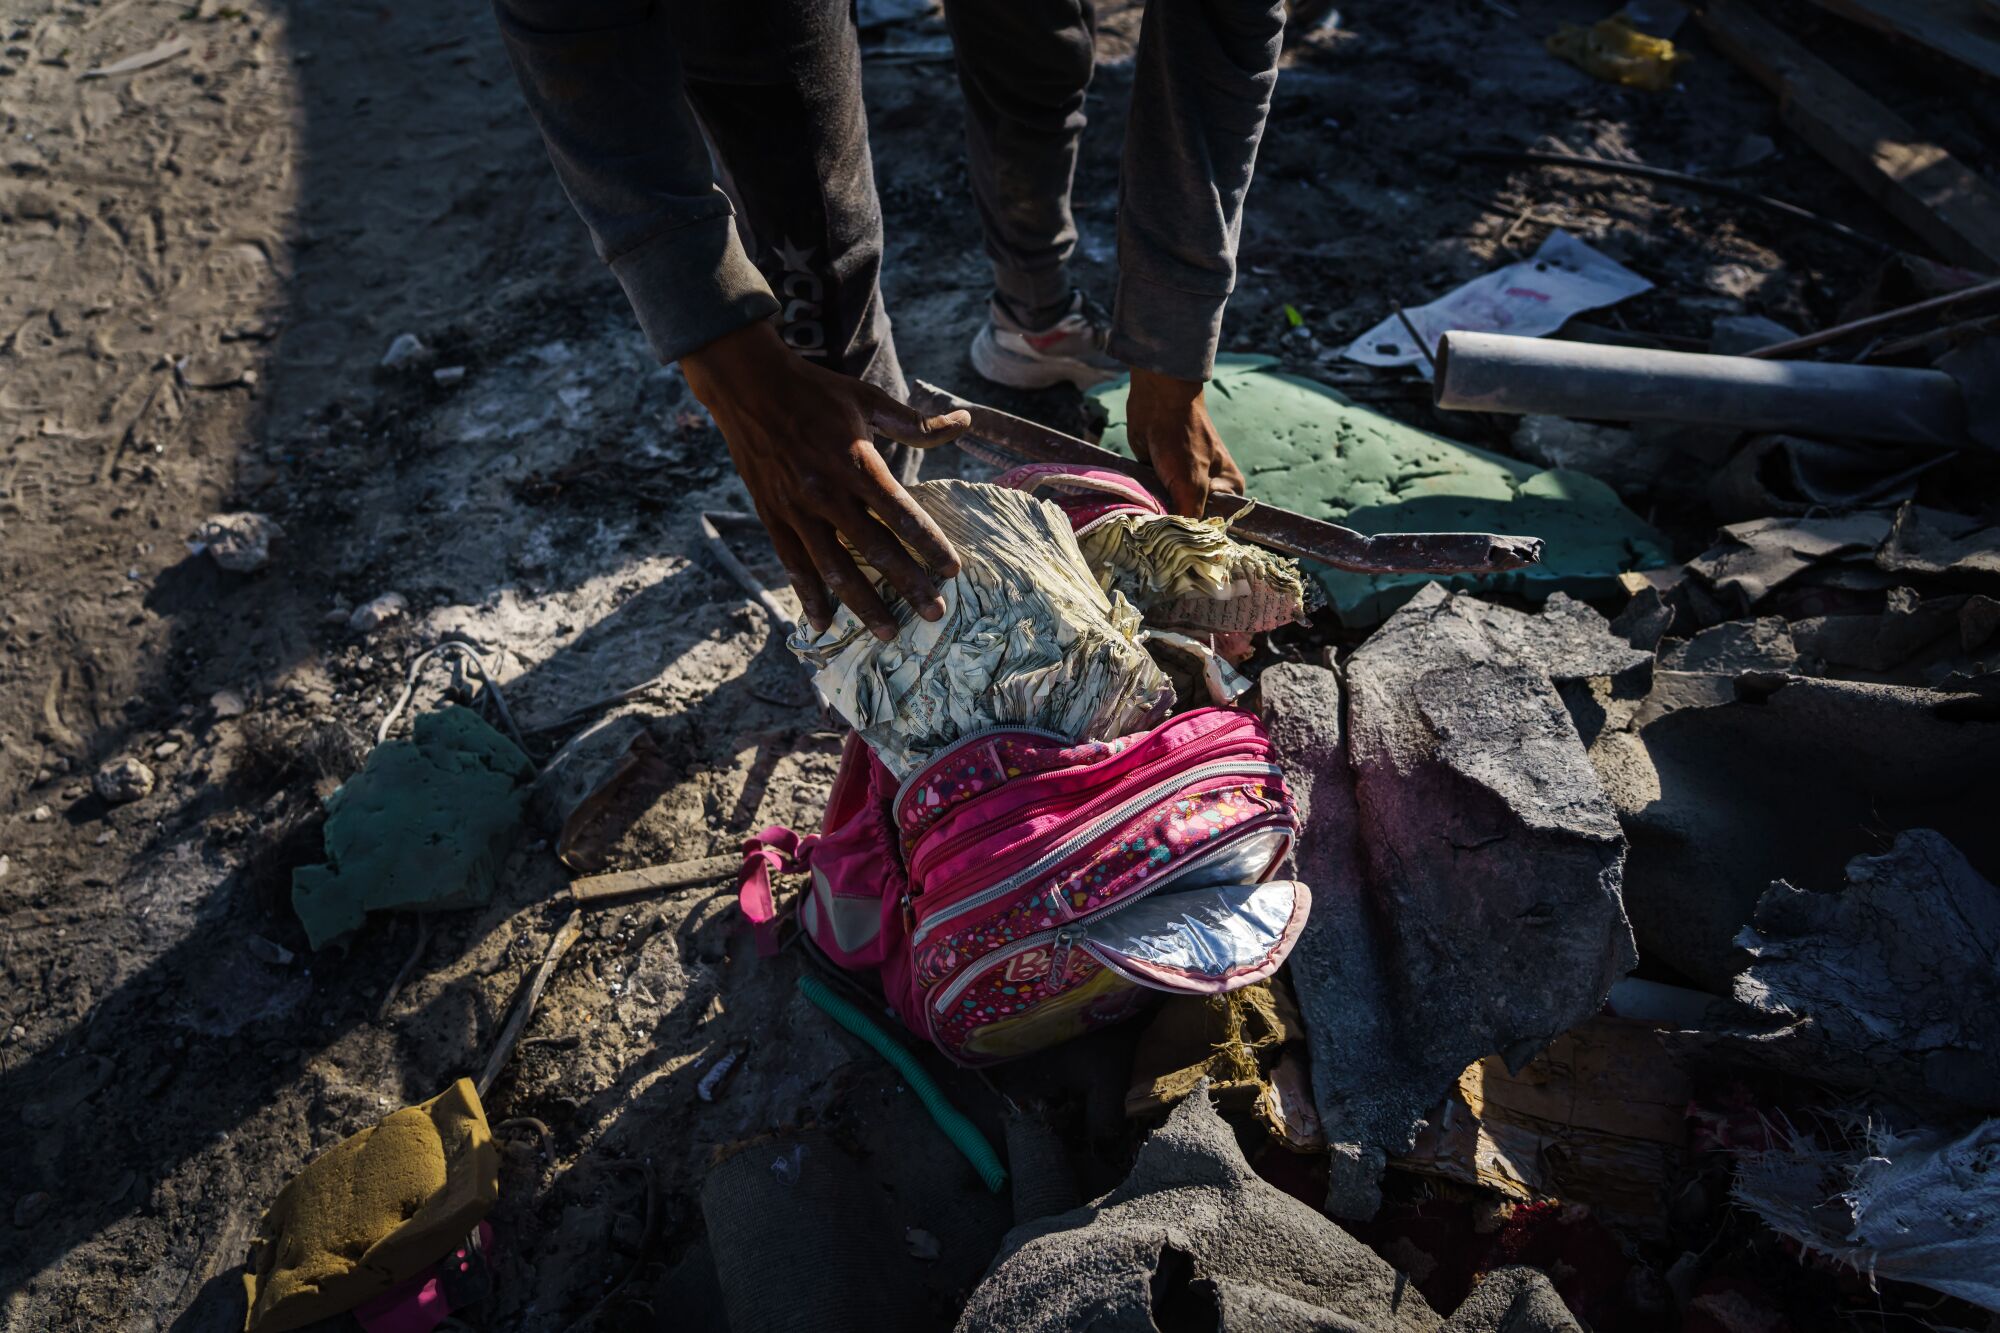 A child's pink school backpack in rubble  